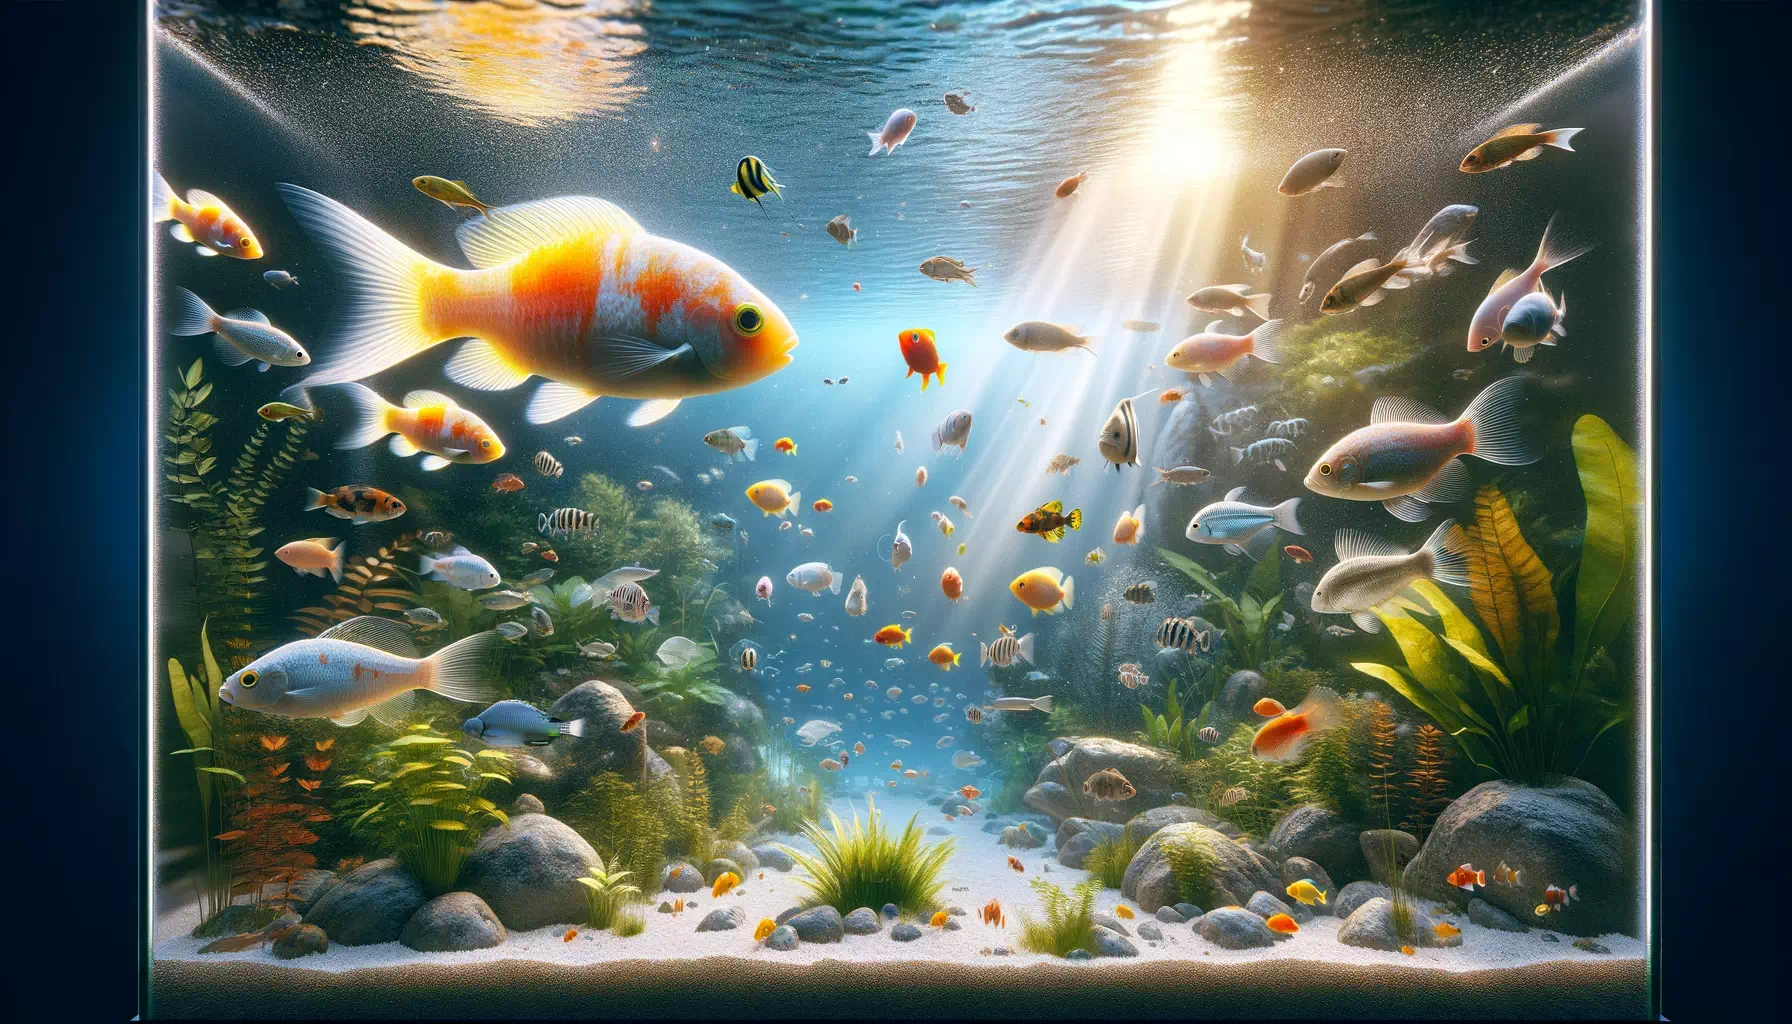 interaction of GloFish with other aquarium species. The image should depict a highly detailed and realistic